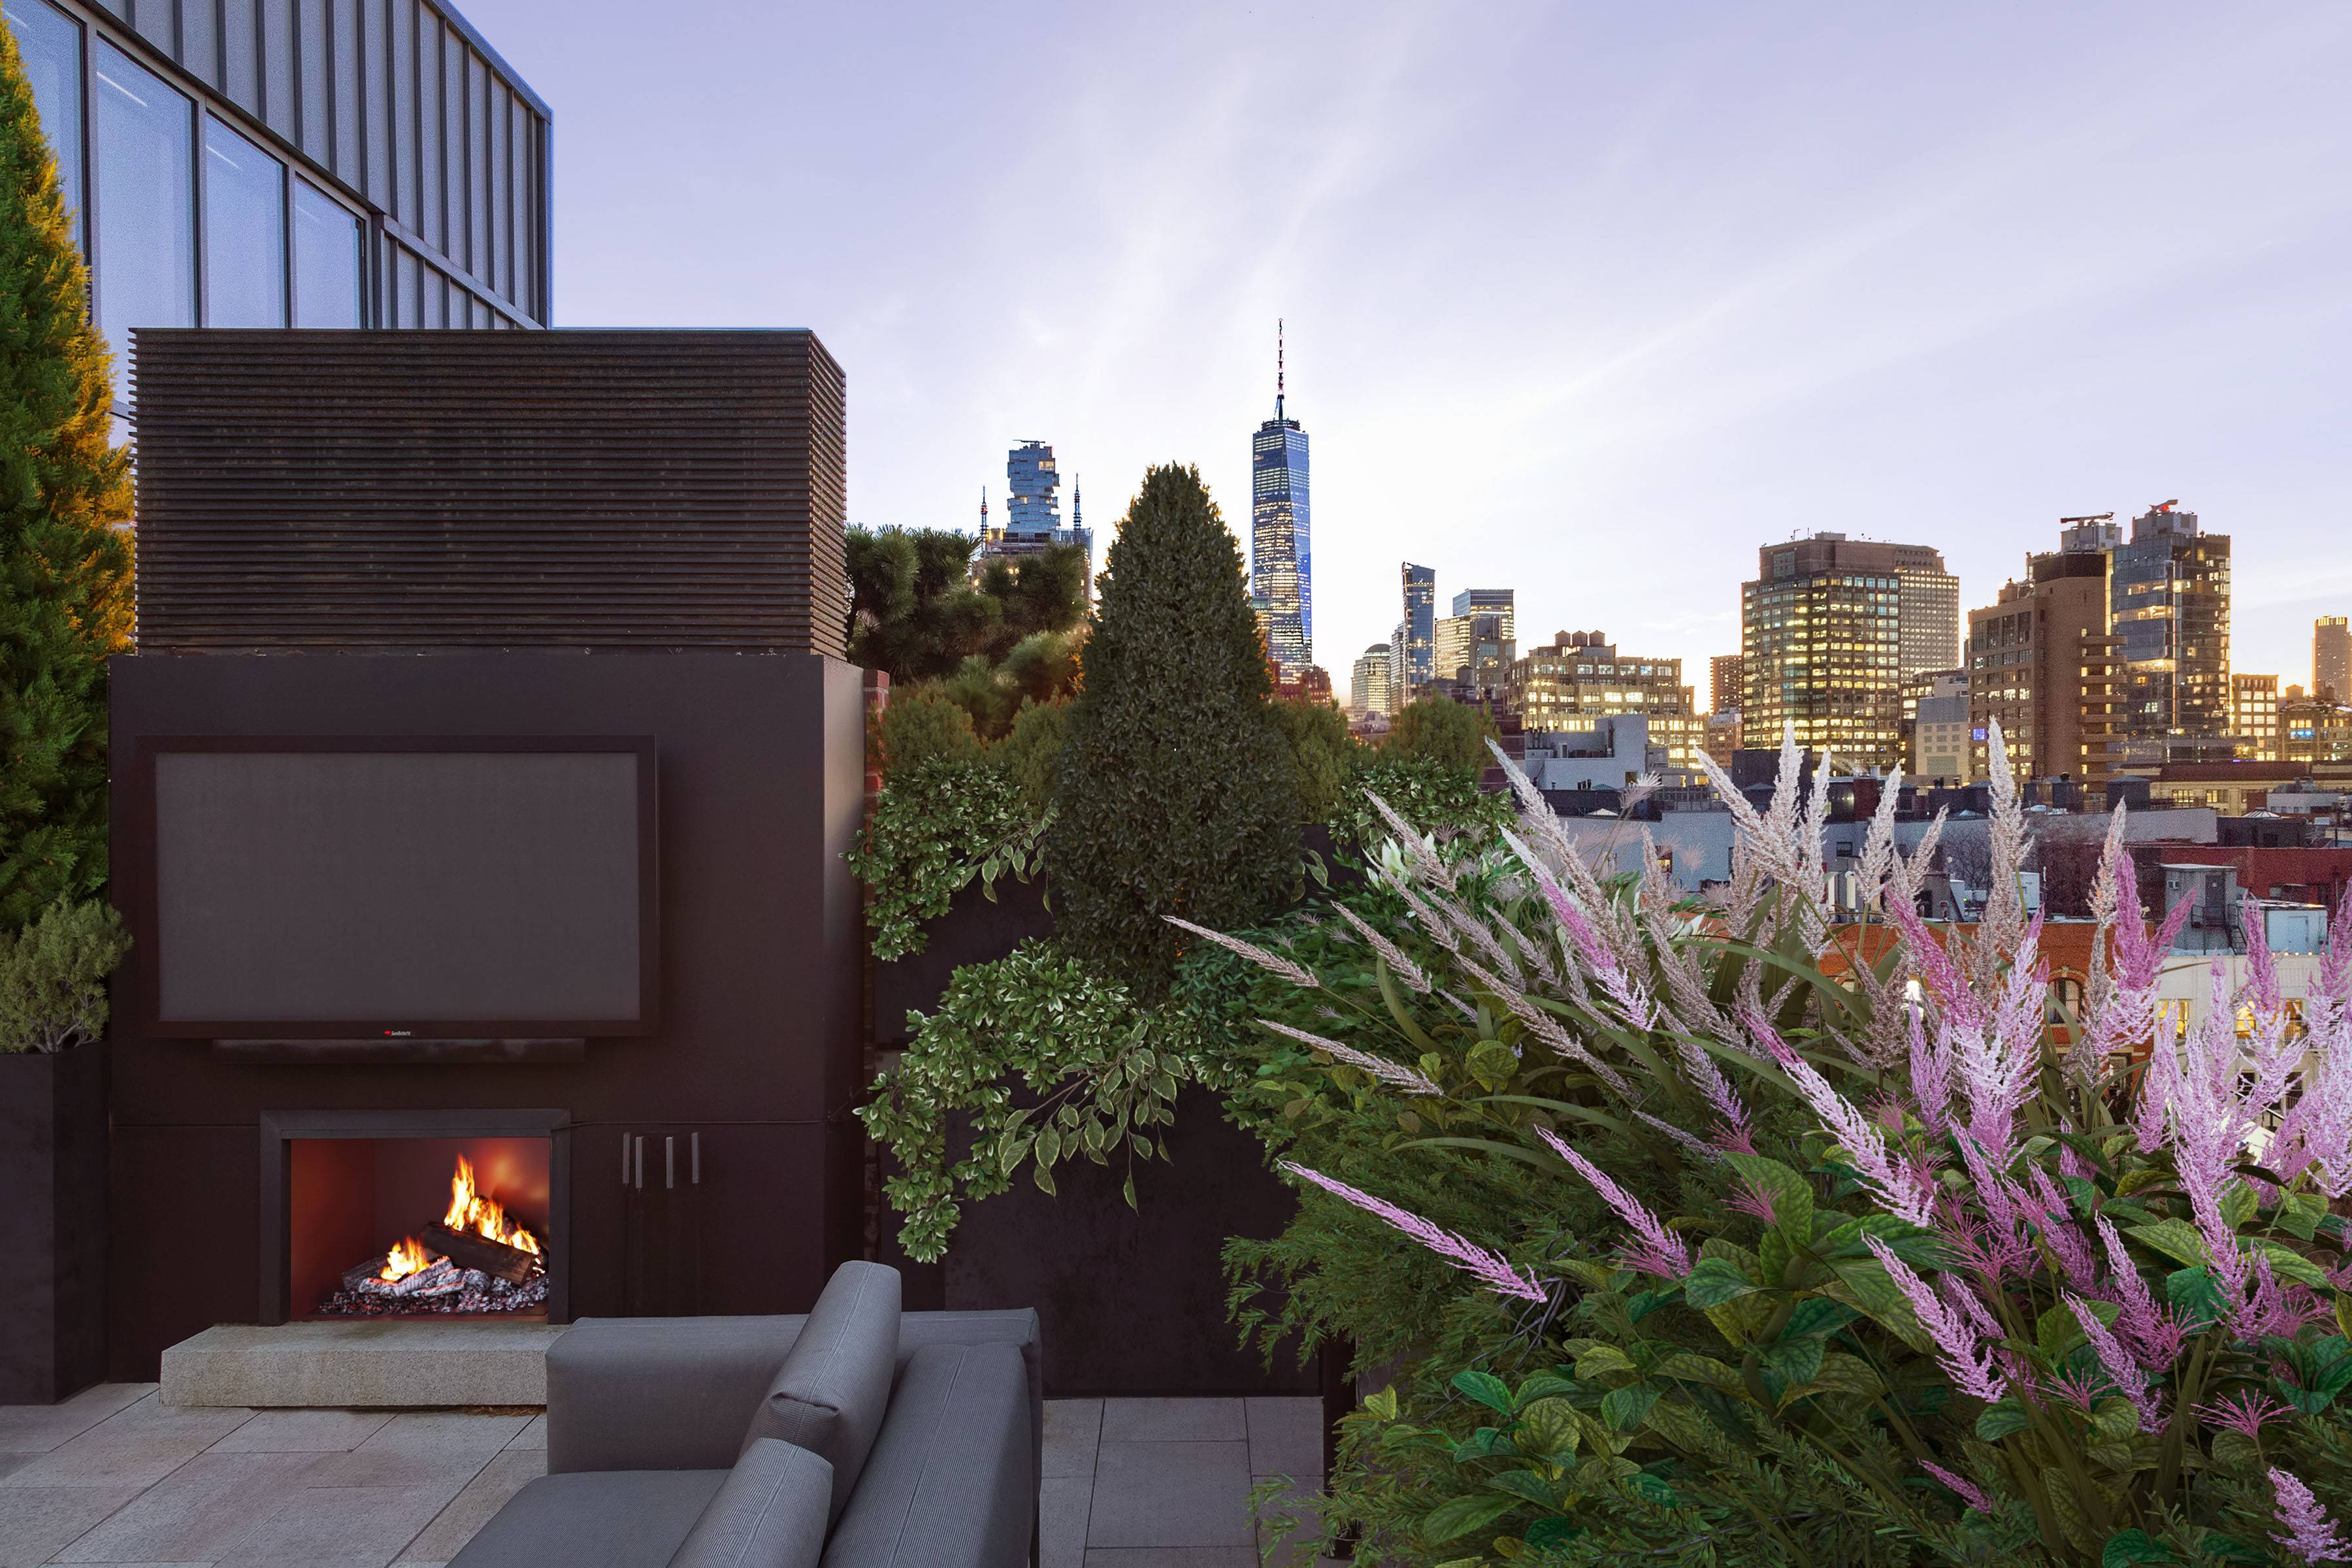 One of the most architecturally significant Penthouses to come to market in Prime SoHo.